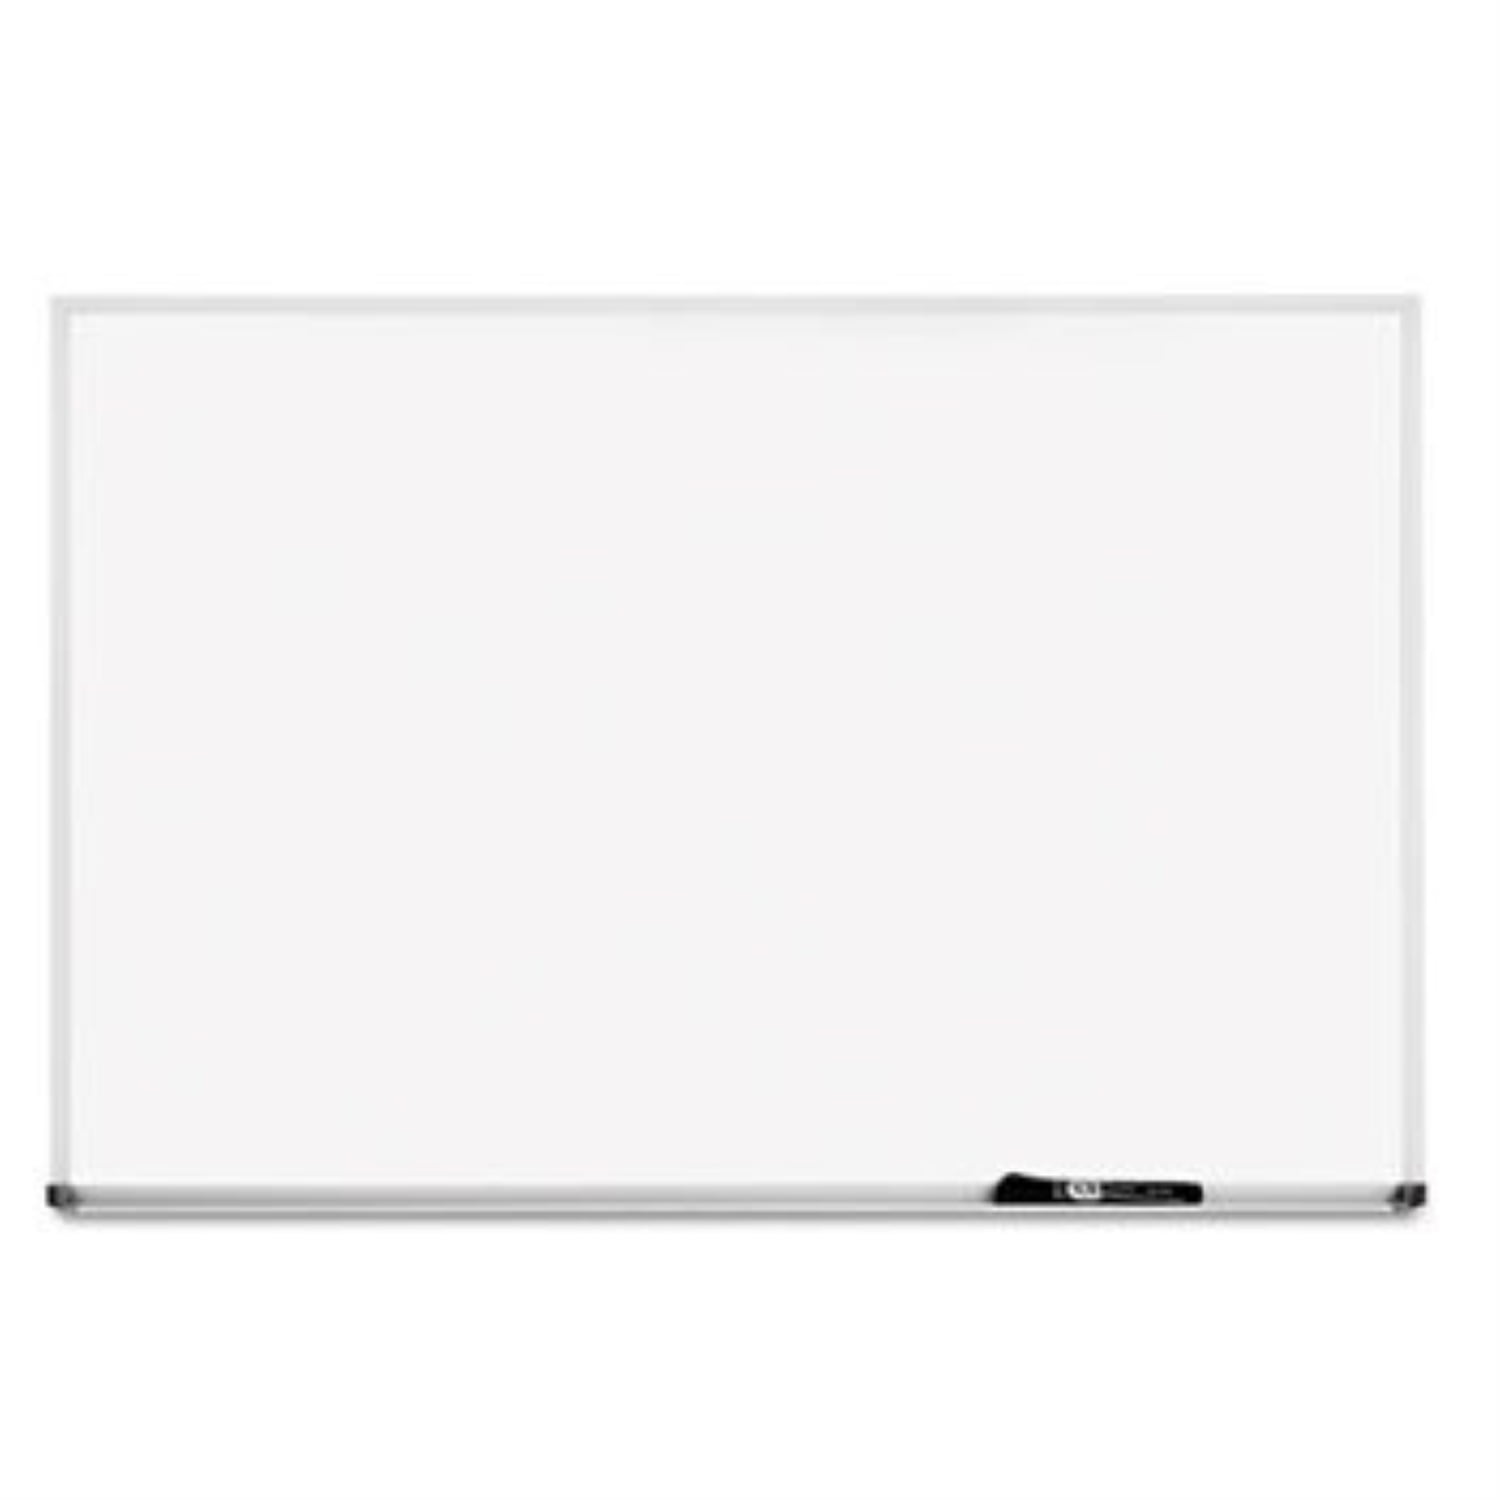 Mead 85357 4x3ft Silver Aluminum Frame Dry Erase Whiteboard for sale online 